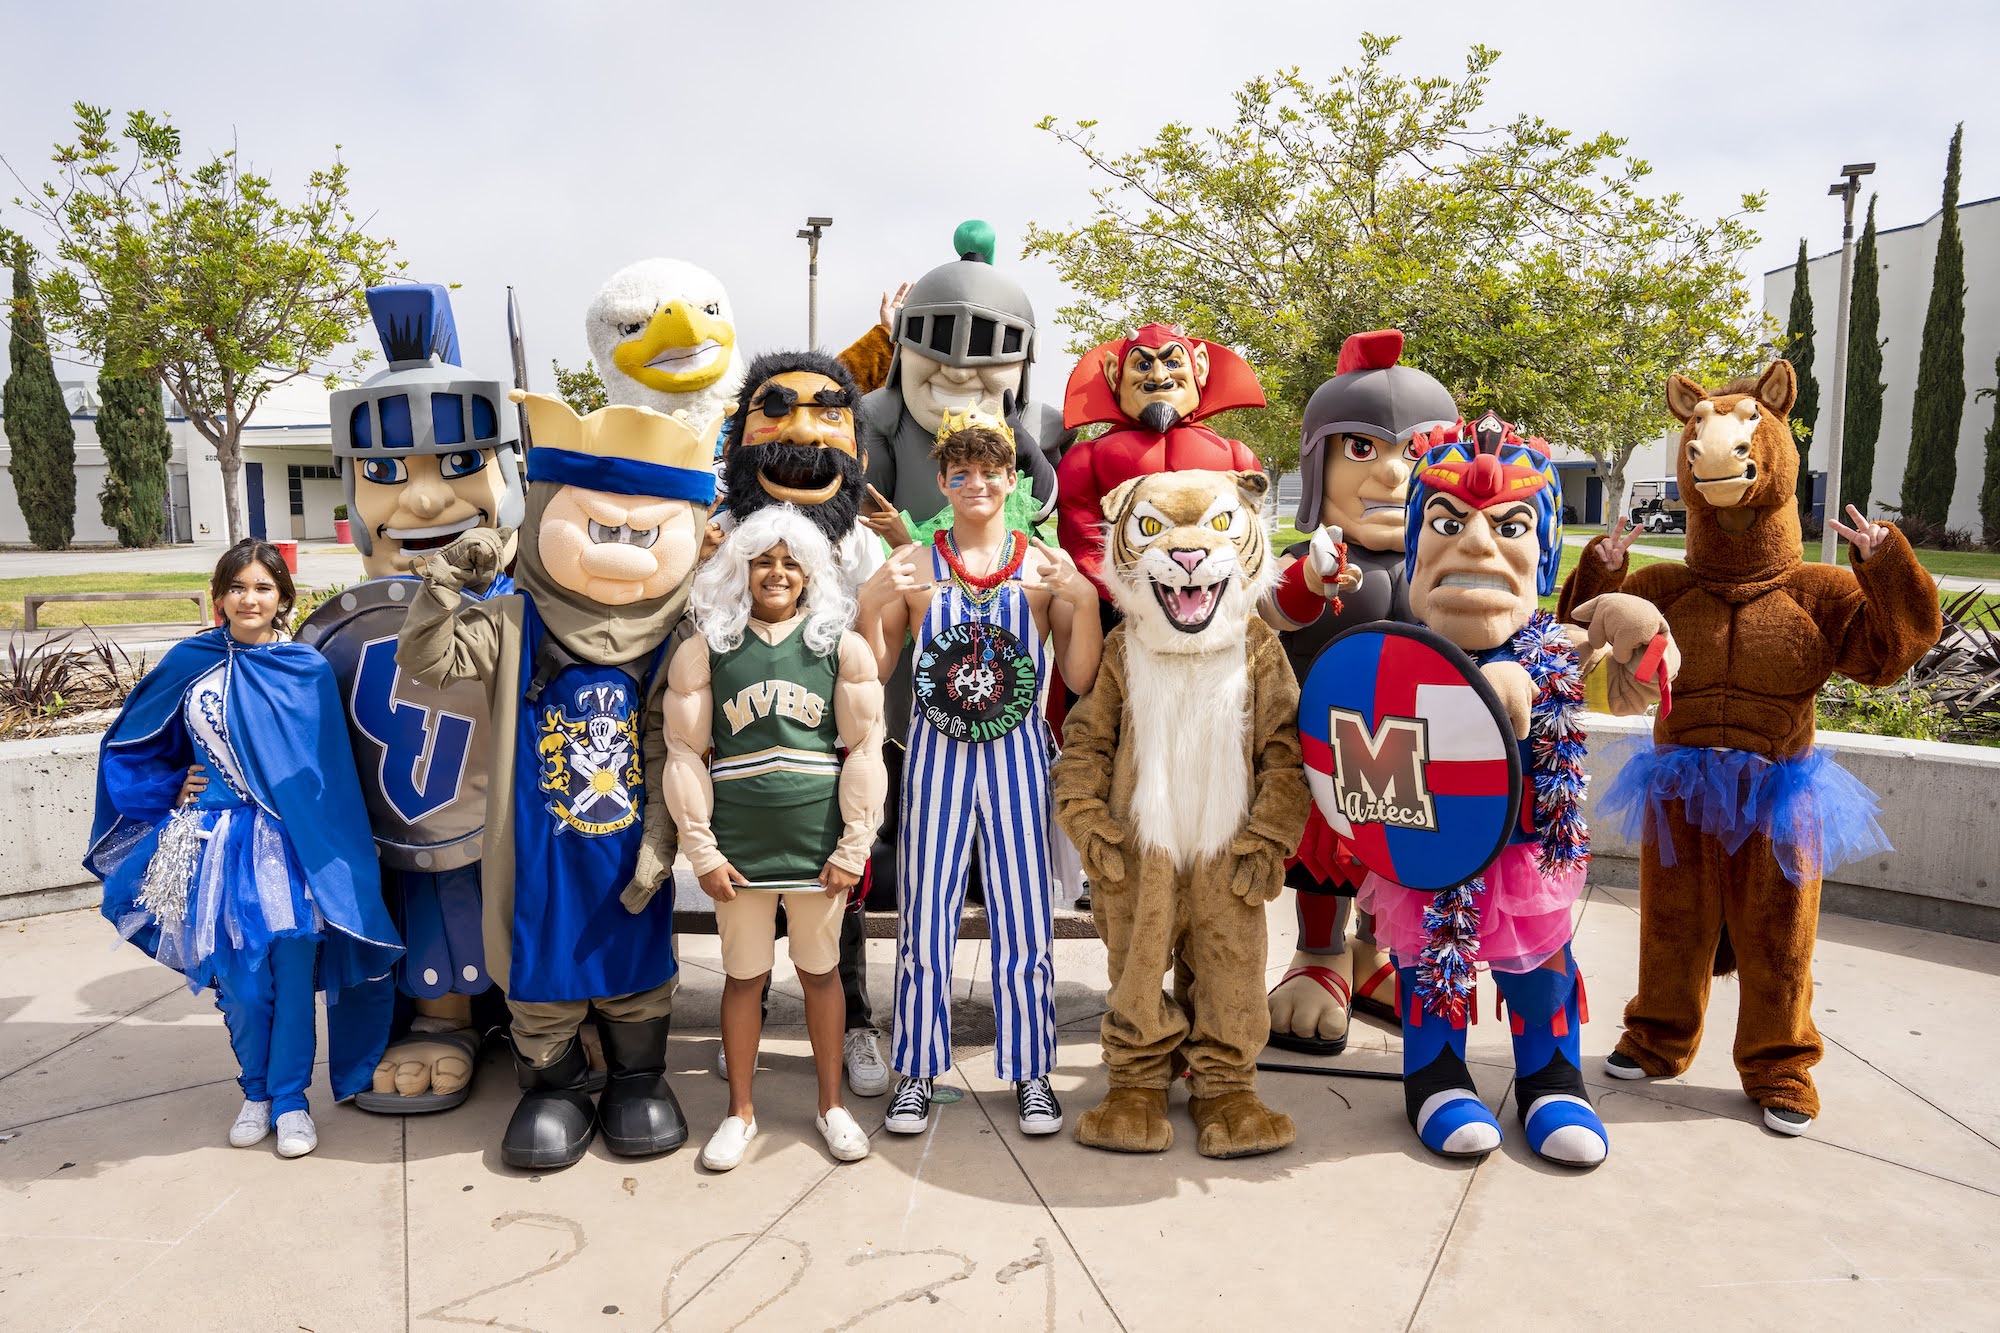 Group photo of school mascots with a title "WHERE YOU BELONG!" #WeAreSUHSD 